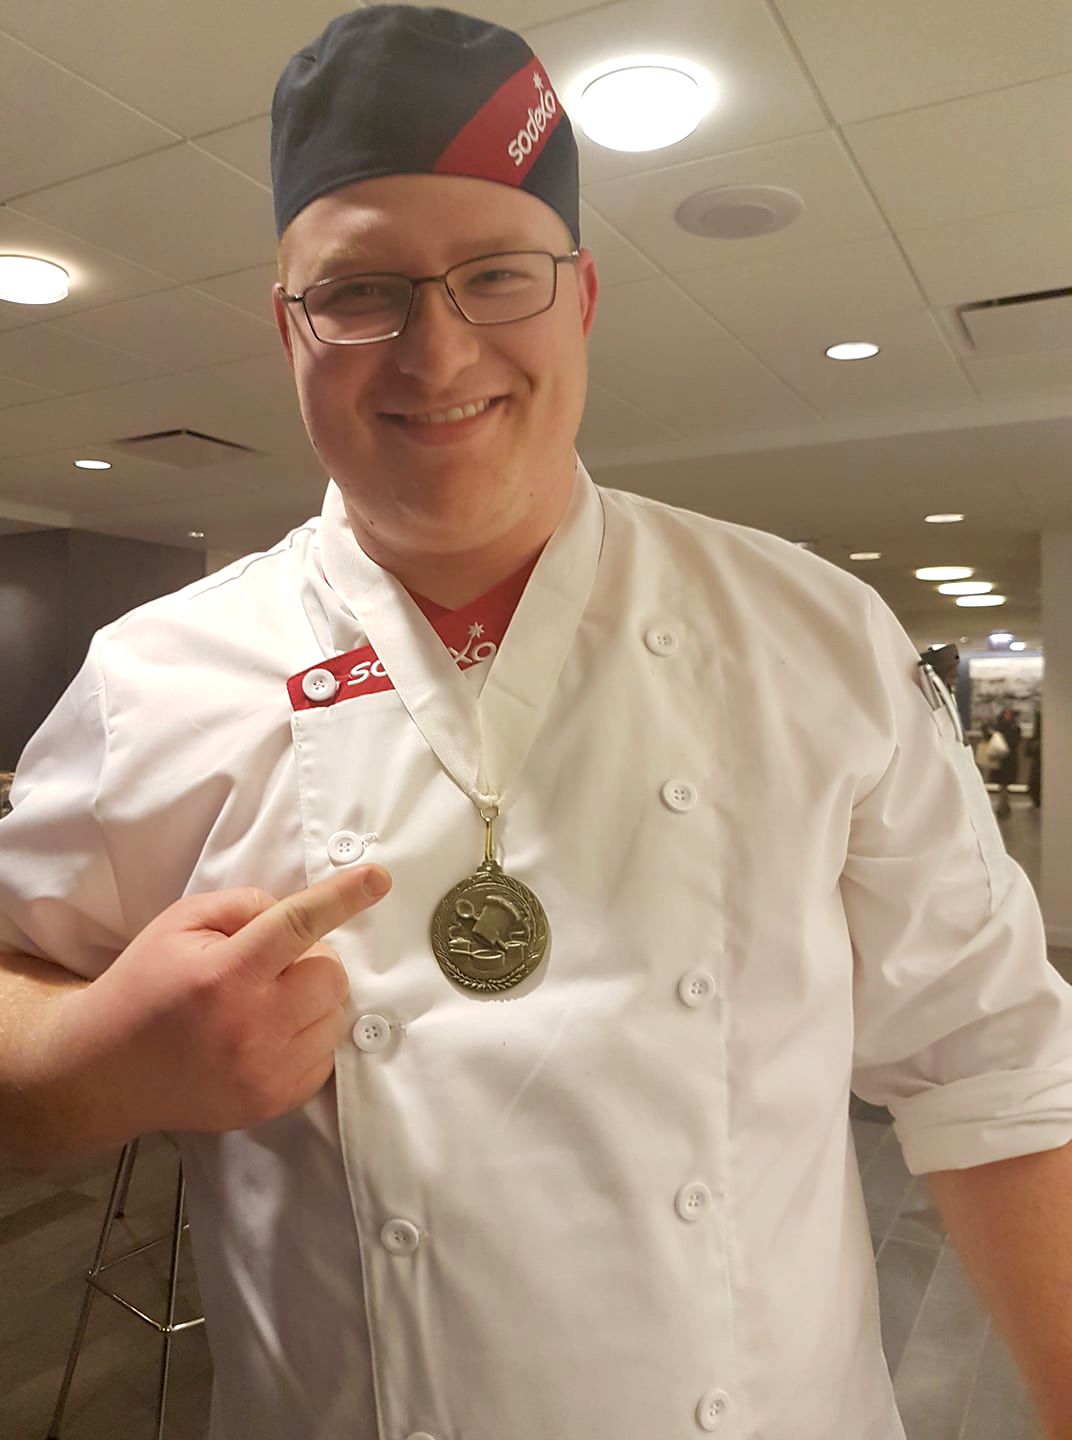 Cornwall Chef takes home the Copper Skillet